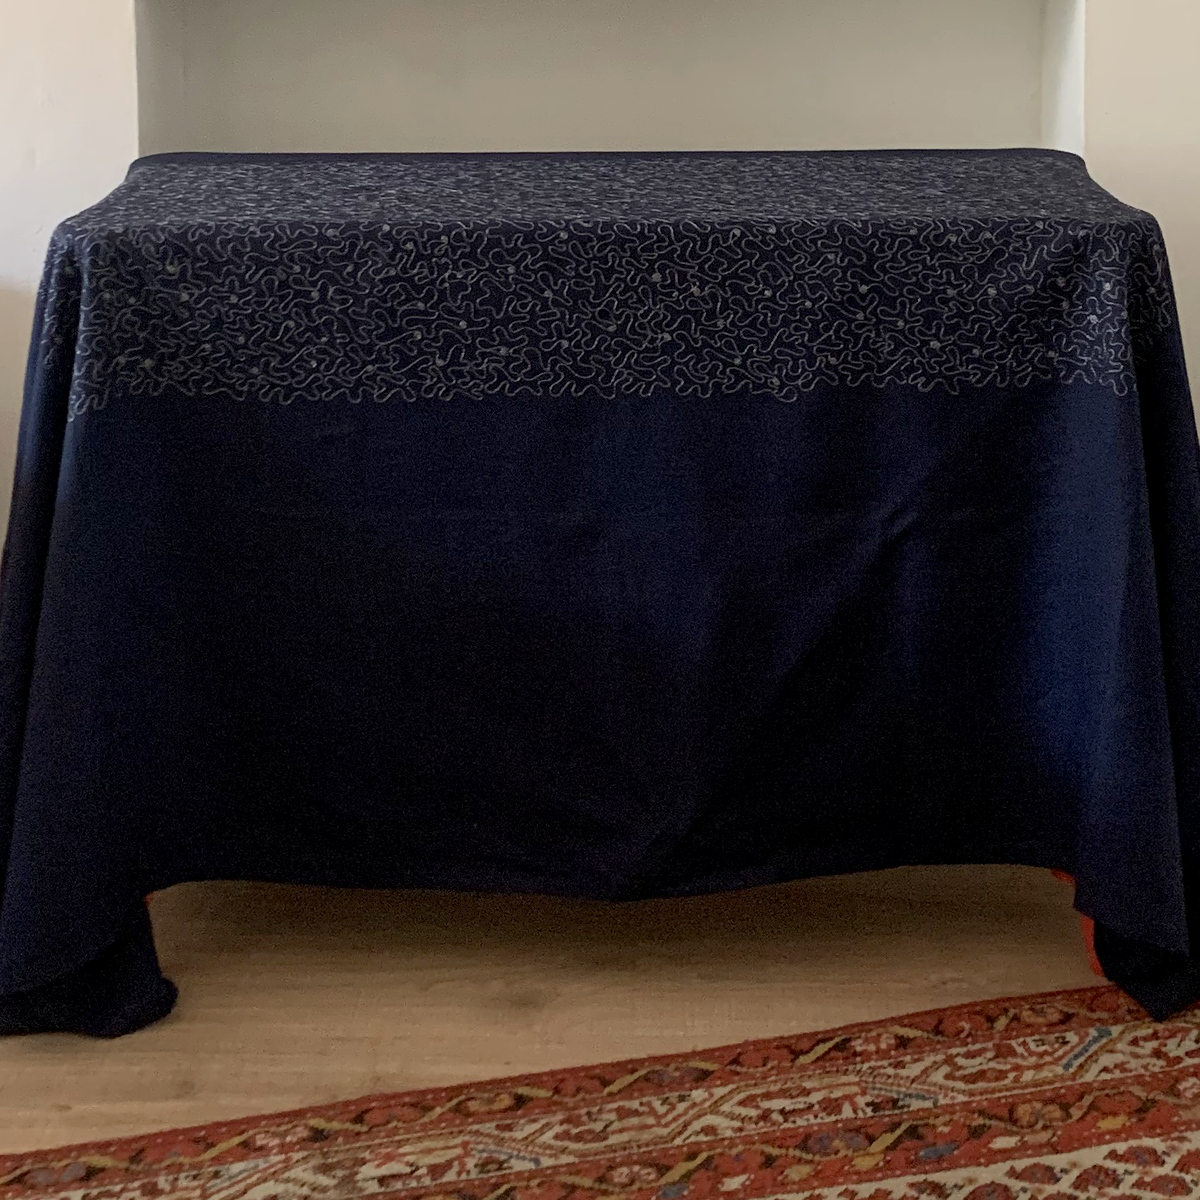 Starry Night: Navy Blue Tablecloth with Intricate Embroidery